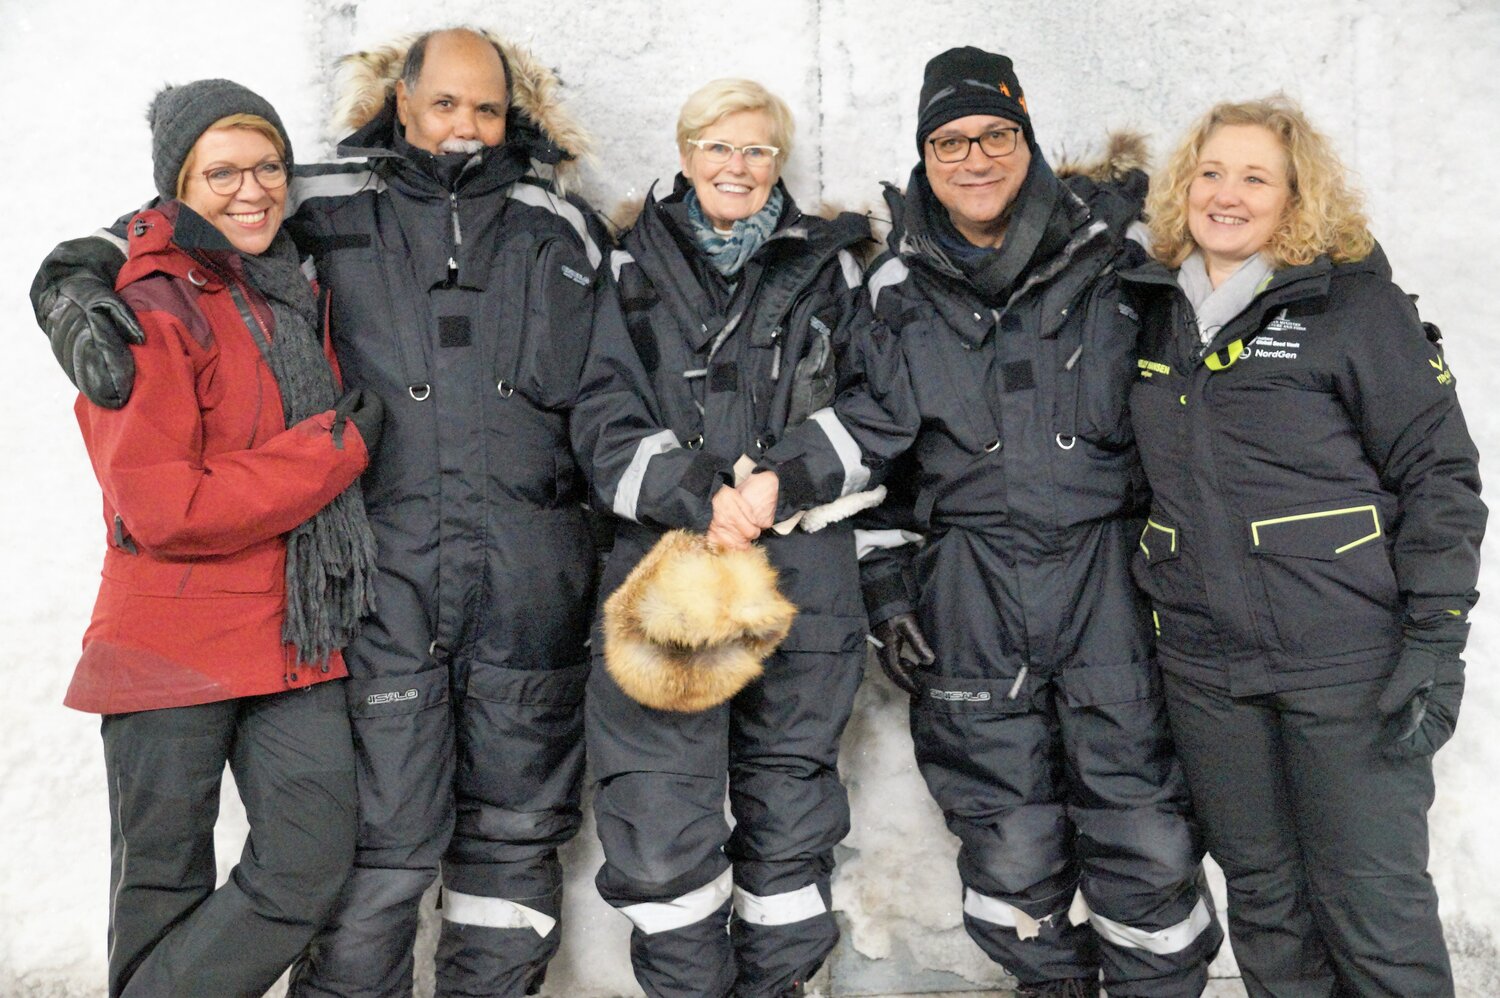 (Left to Right) Marie Haga, Crop Trust Executive Director with Dr. Ahmed Amri, ICARDA's Head of Genetic Resources; Margret Thalwitz, ICARDA Board Chair; Aly Abousabaa, ICARDA Director General and Lise Lykke Steffenson, Director of NordGen inside the Svalbard Global Seed Vault. Photo: Andrea Gros, ICARDA